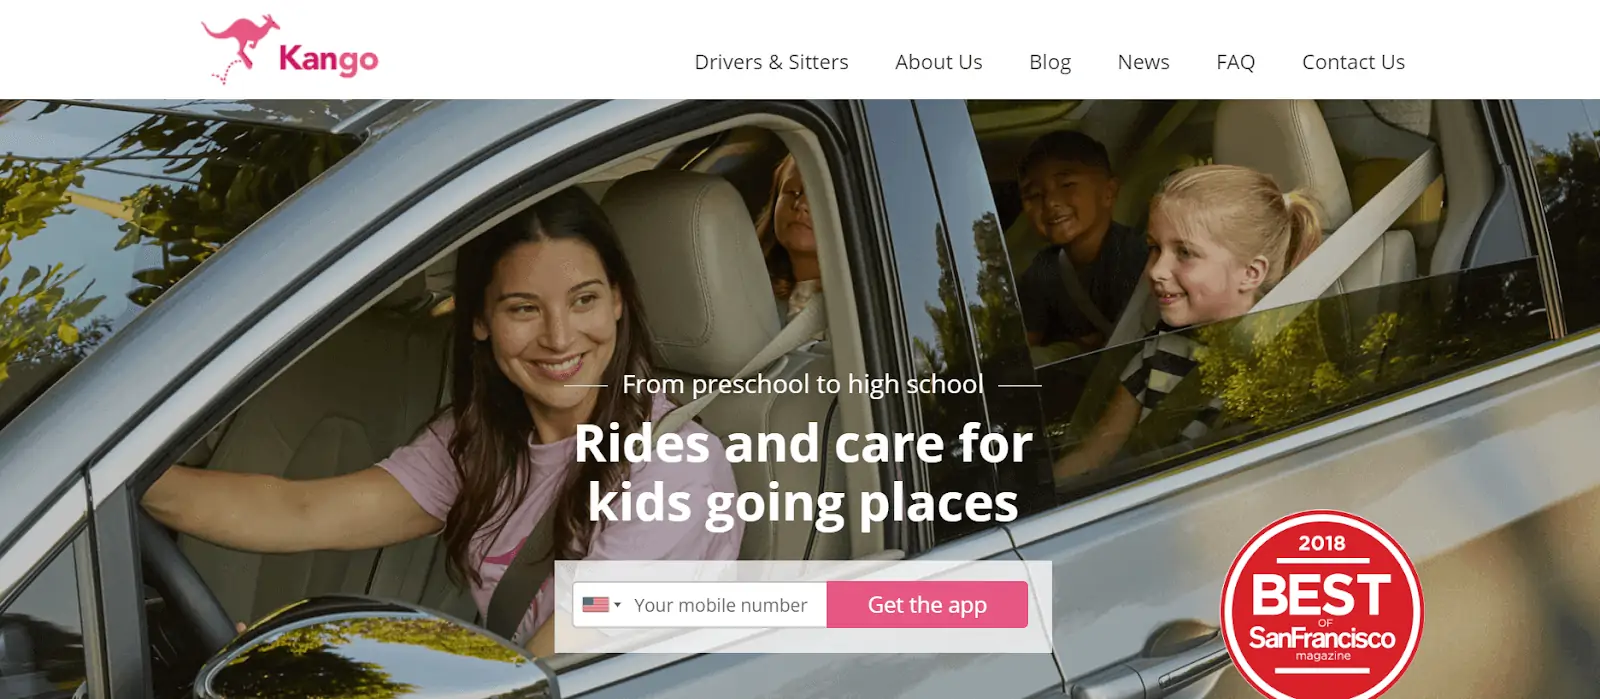 Kango: A service that is like Uber for kids